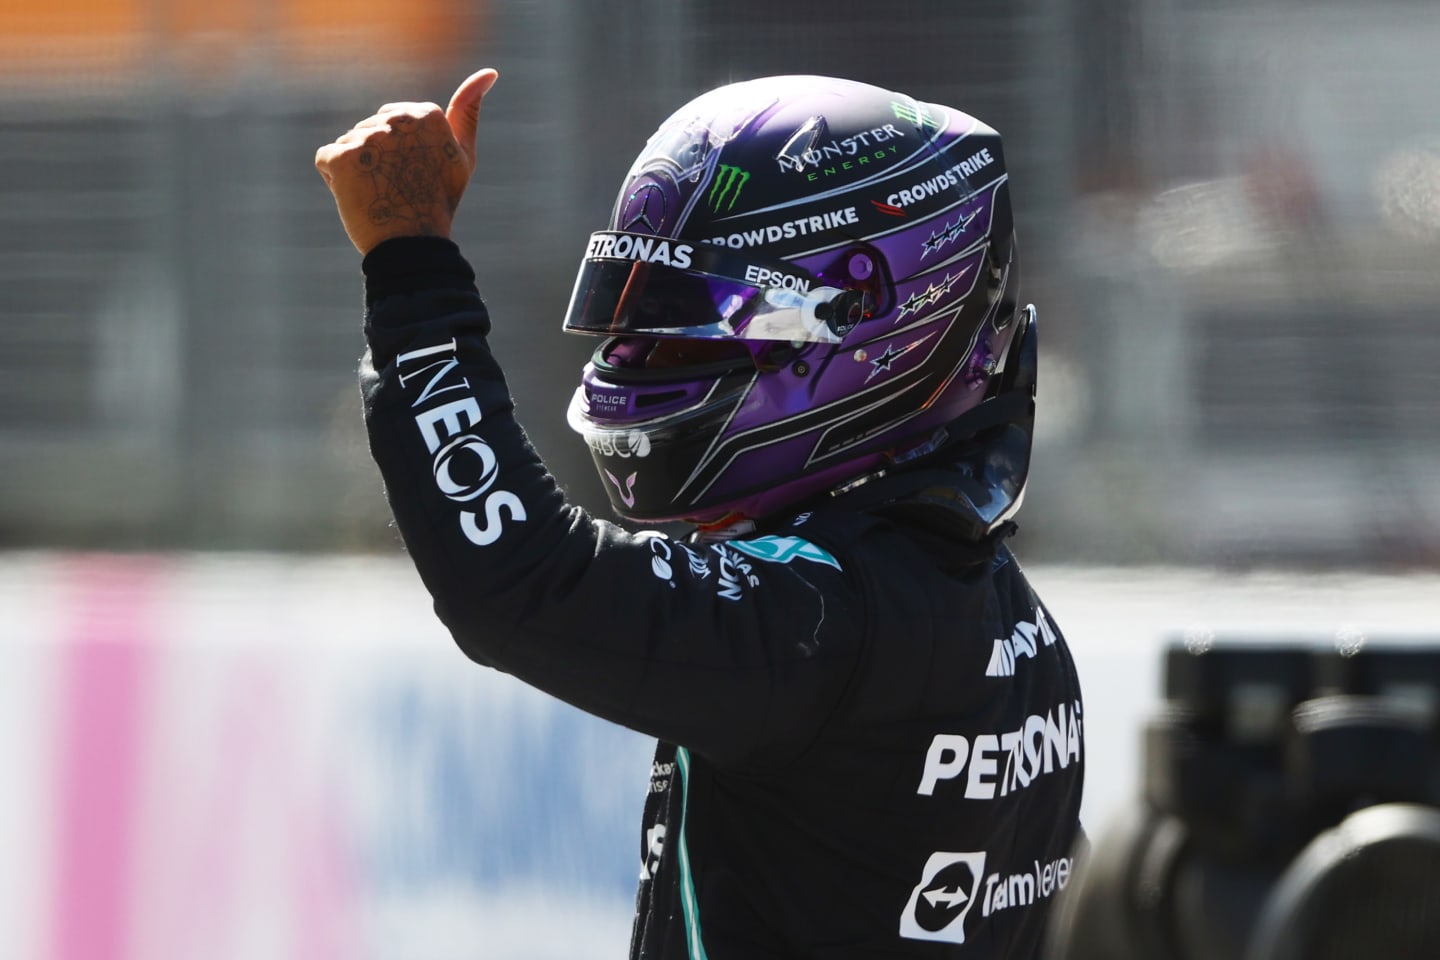 SPIELBERG, AUSTRIA - JUNE 26: Third place qualifier Lewis Hamilton of Great Britain and Mercedes GP waves to the crowd from parc ferme during qualifying ahead of the F1 Grand Prix of Styria at Red Bull Ring on June 26, 2021 in Spielberg, Austria. (Photo by Bryn Lennon/Getty Images)